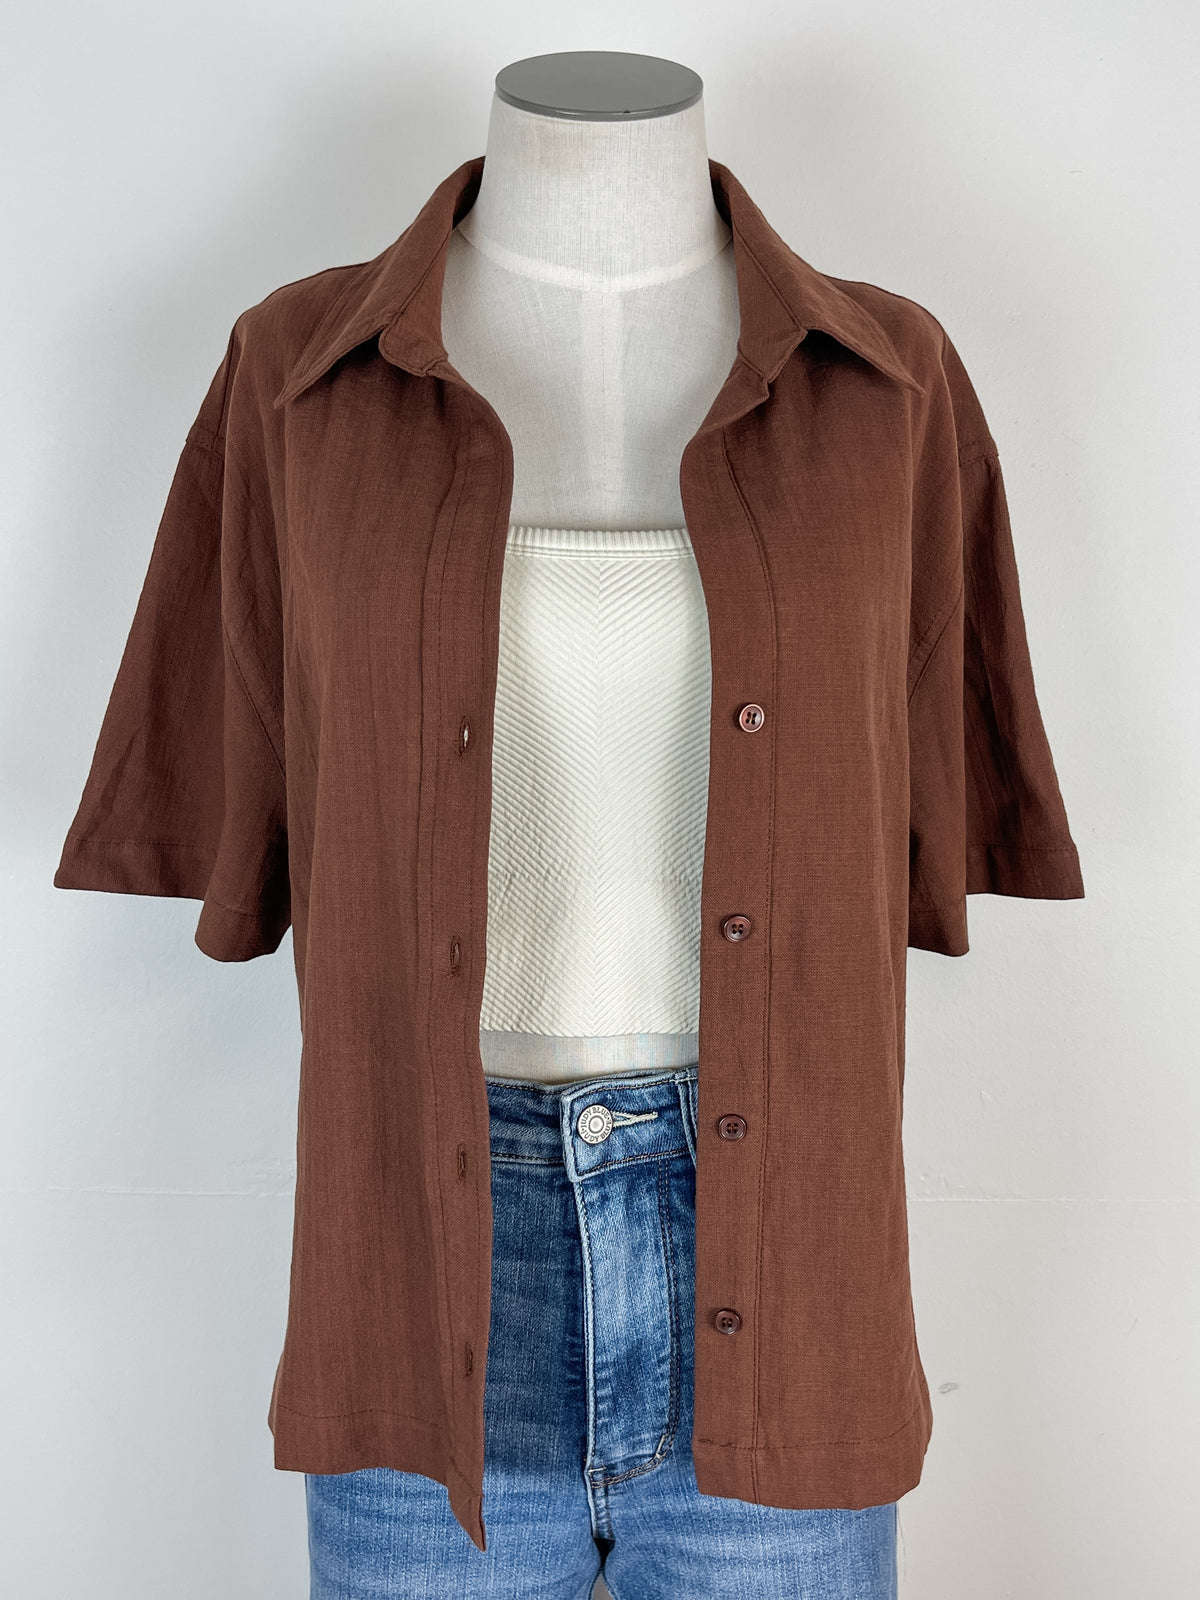 Talia Short Sleeve Button Down in Chocolate